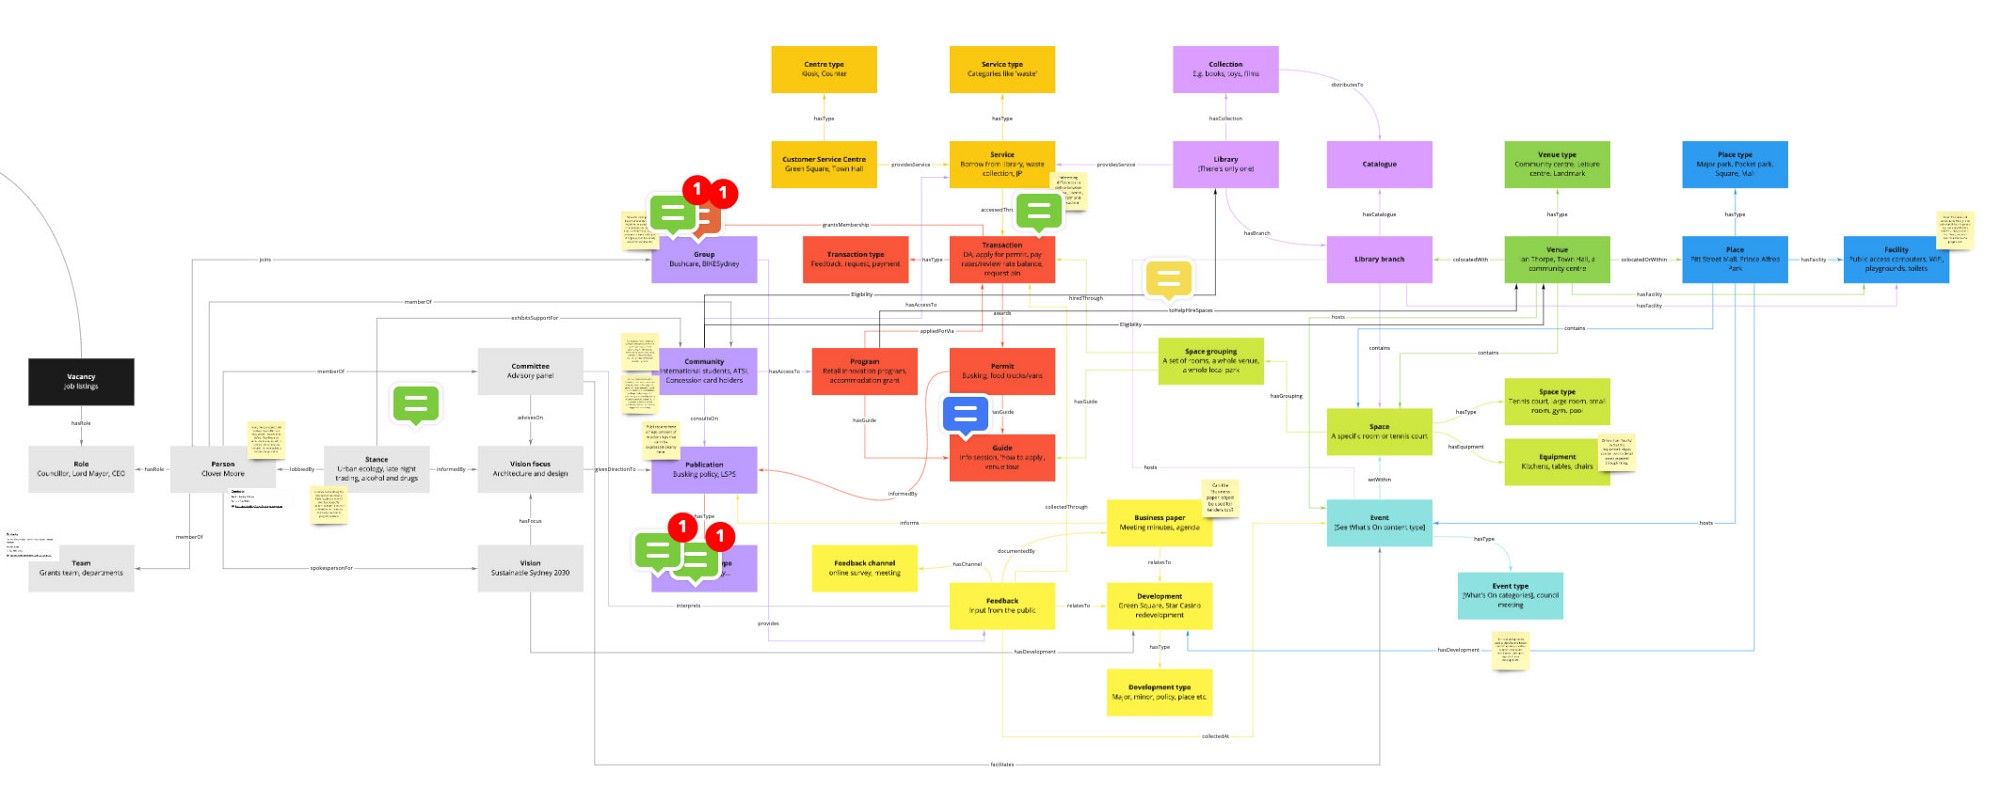 Another intentionally blurry domain model. This one shows an early stab at a holistic, consolidated model.